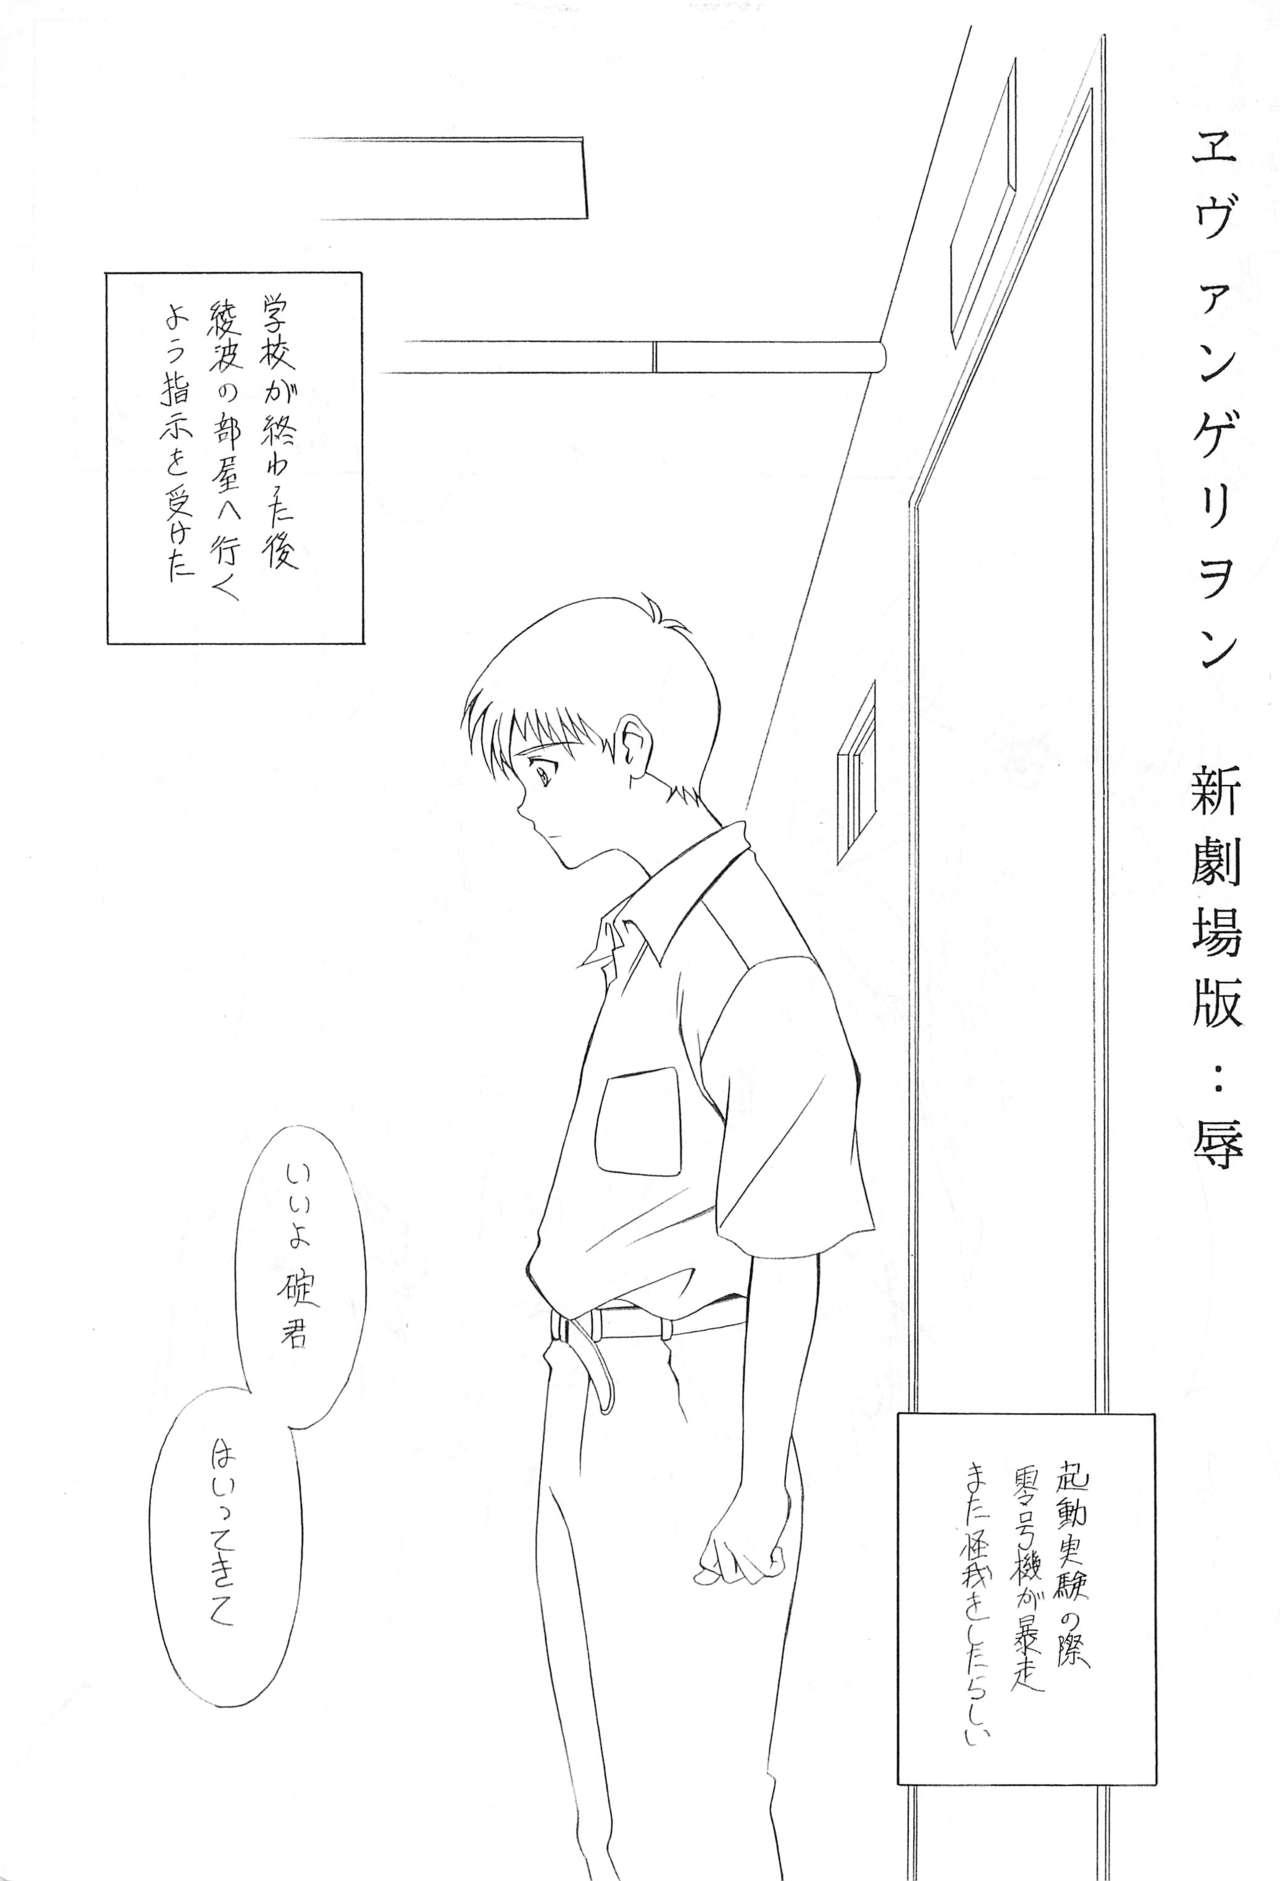 Thong E can G vol.20 - Neon genesis evangelion Dick - Page 3